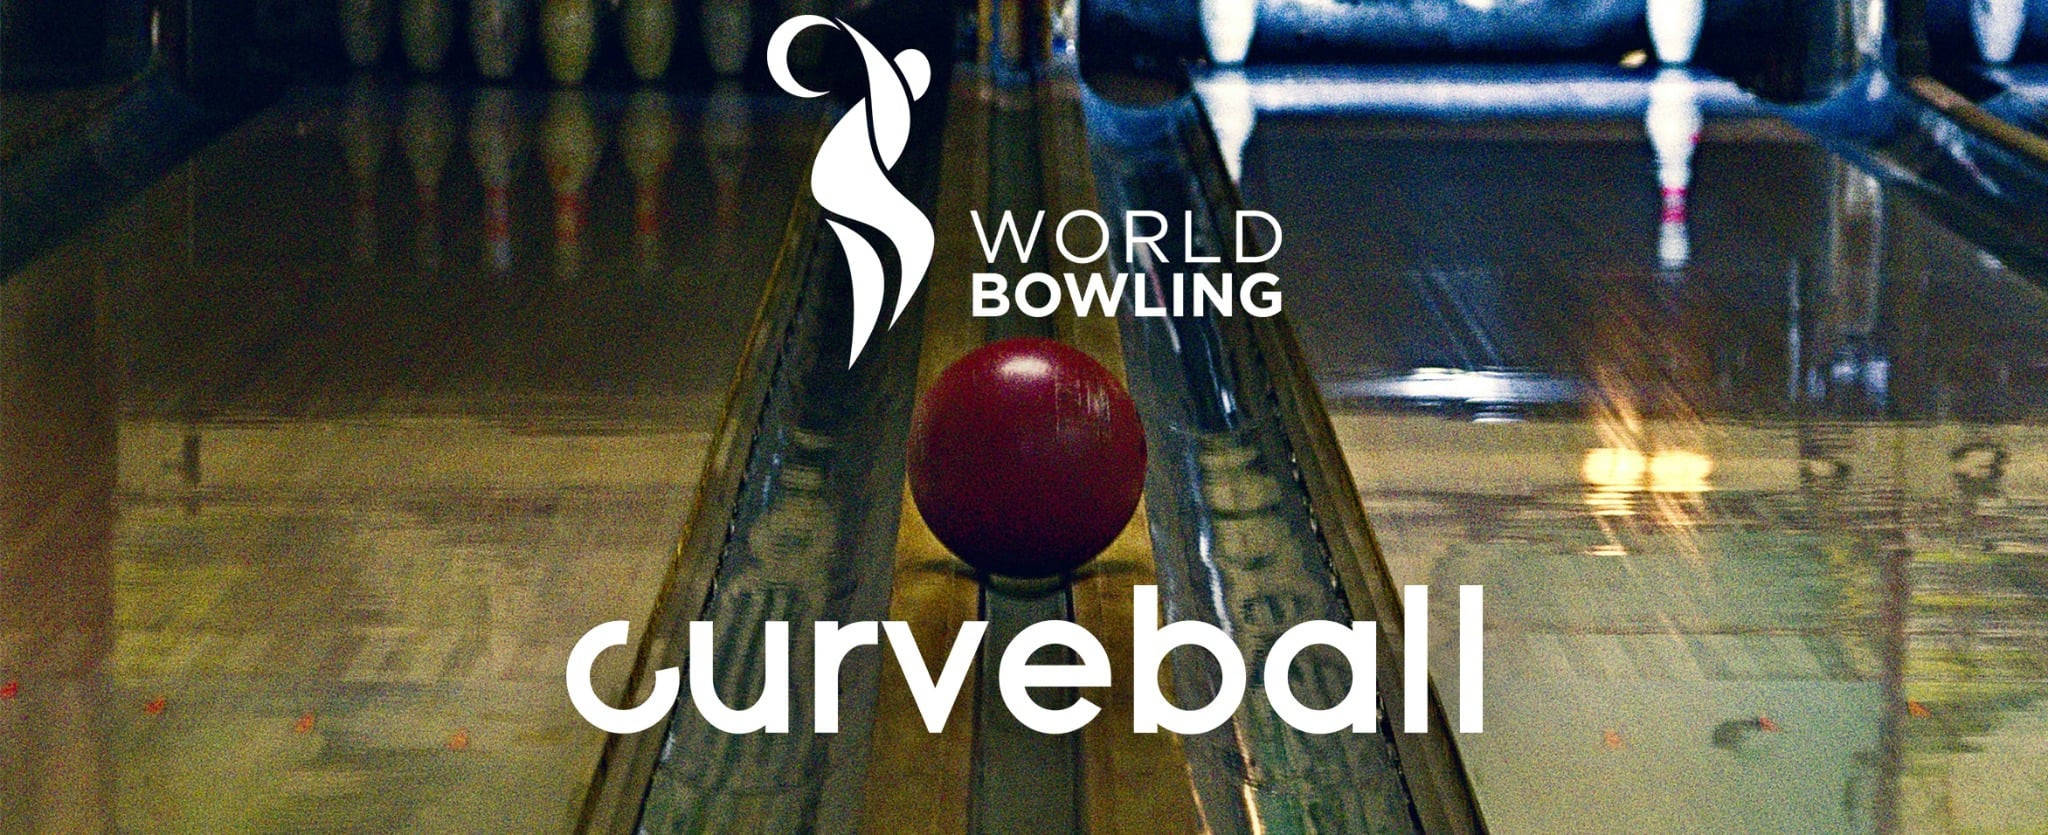 World Bowling announce partnership with social media and content agency Curveball Digital